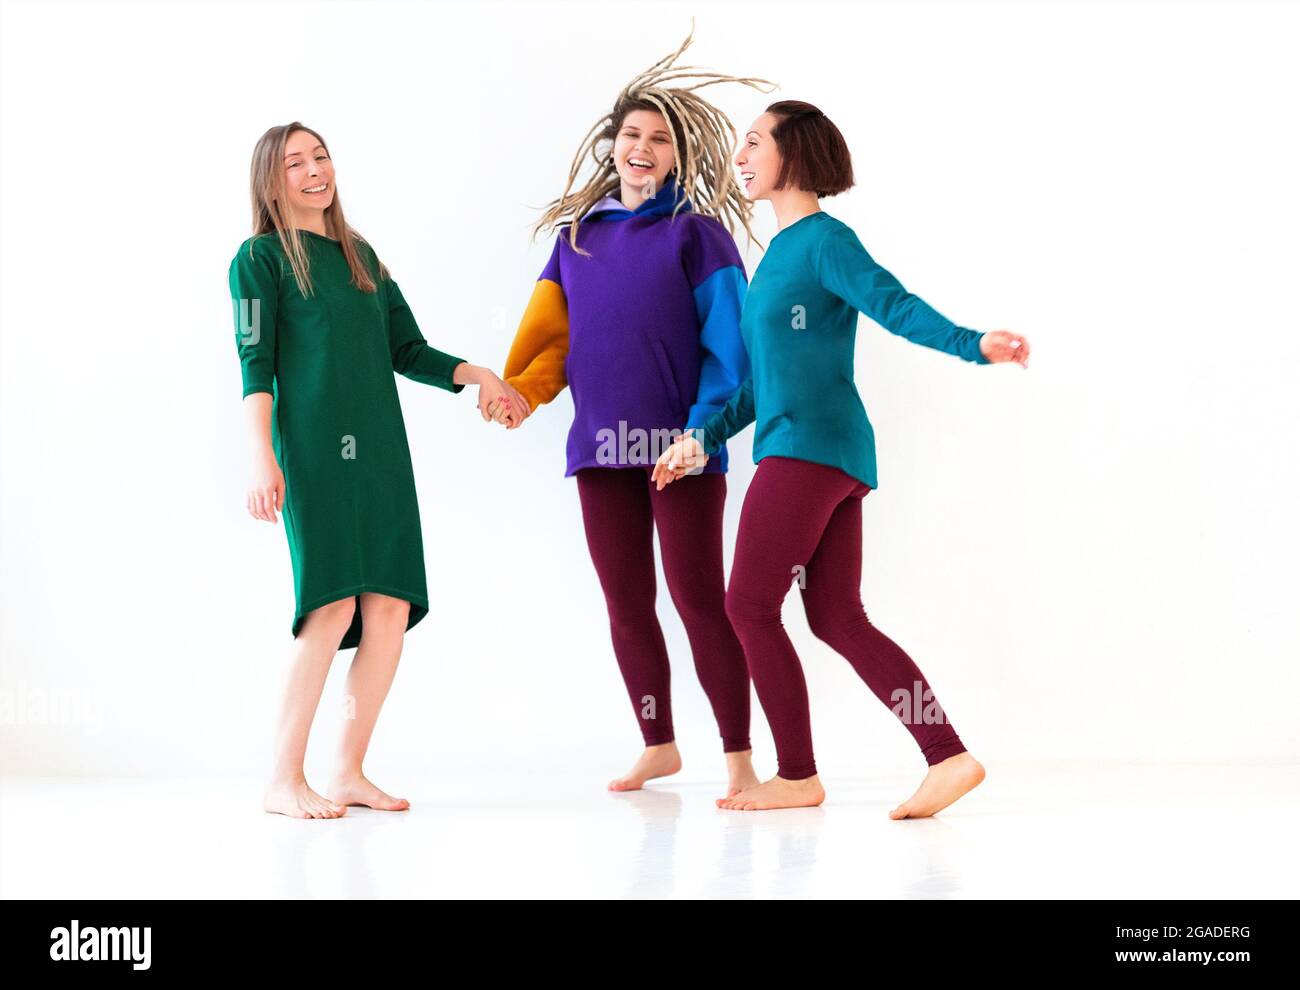 Image Of Three Happy Playful Barefoot Women Of Different Age Holding